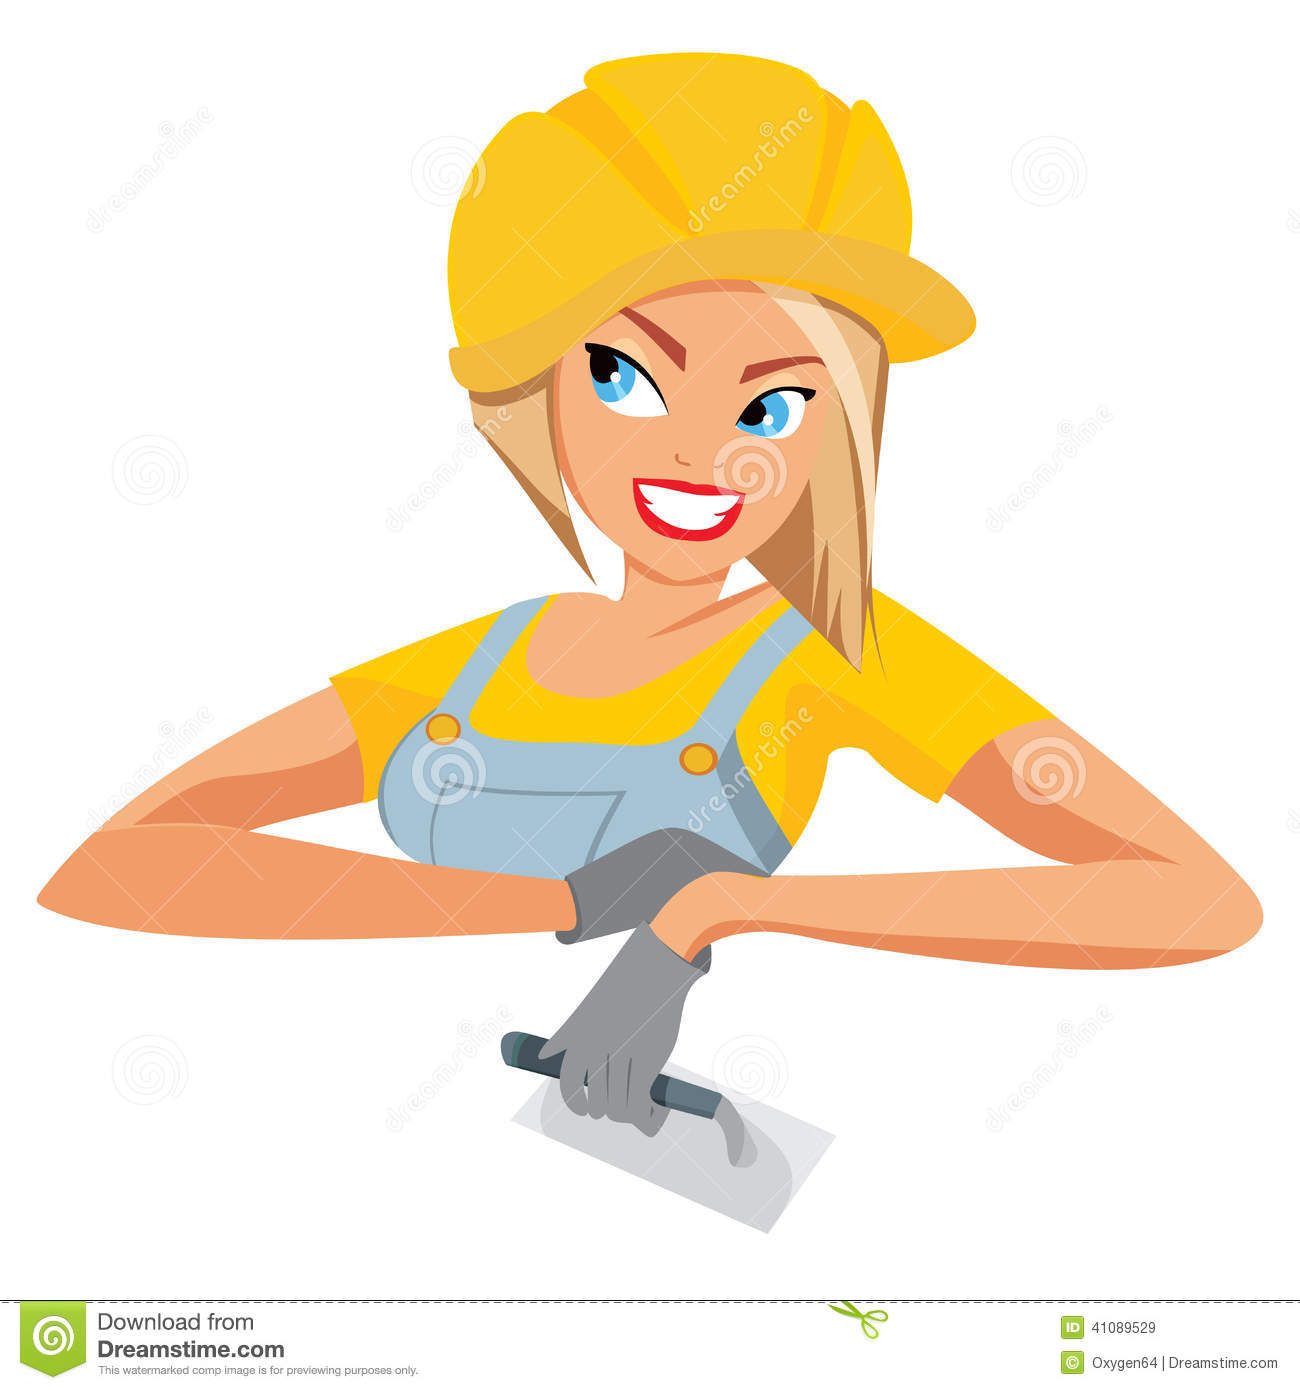 Royalty Free Stock Images  Woman Construction Worker  Image  41089529